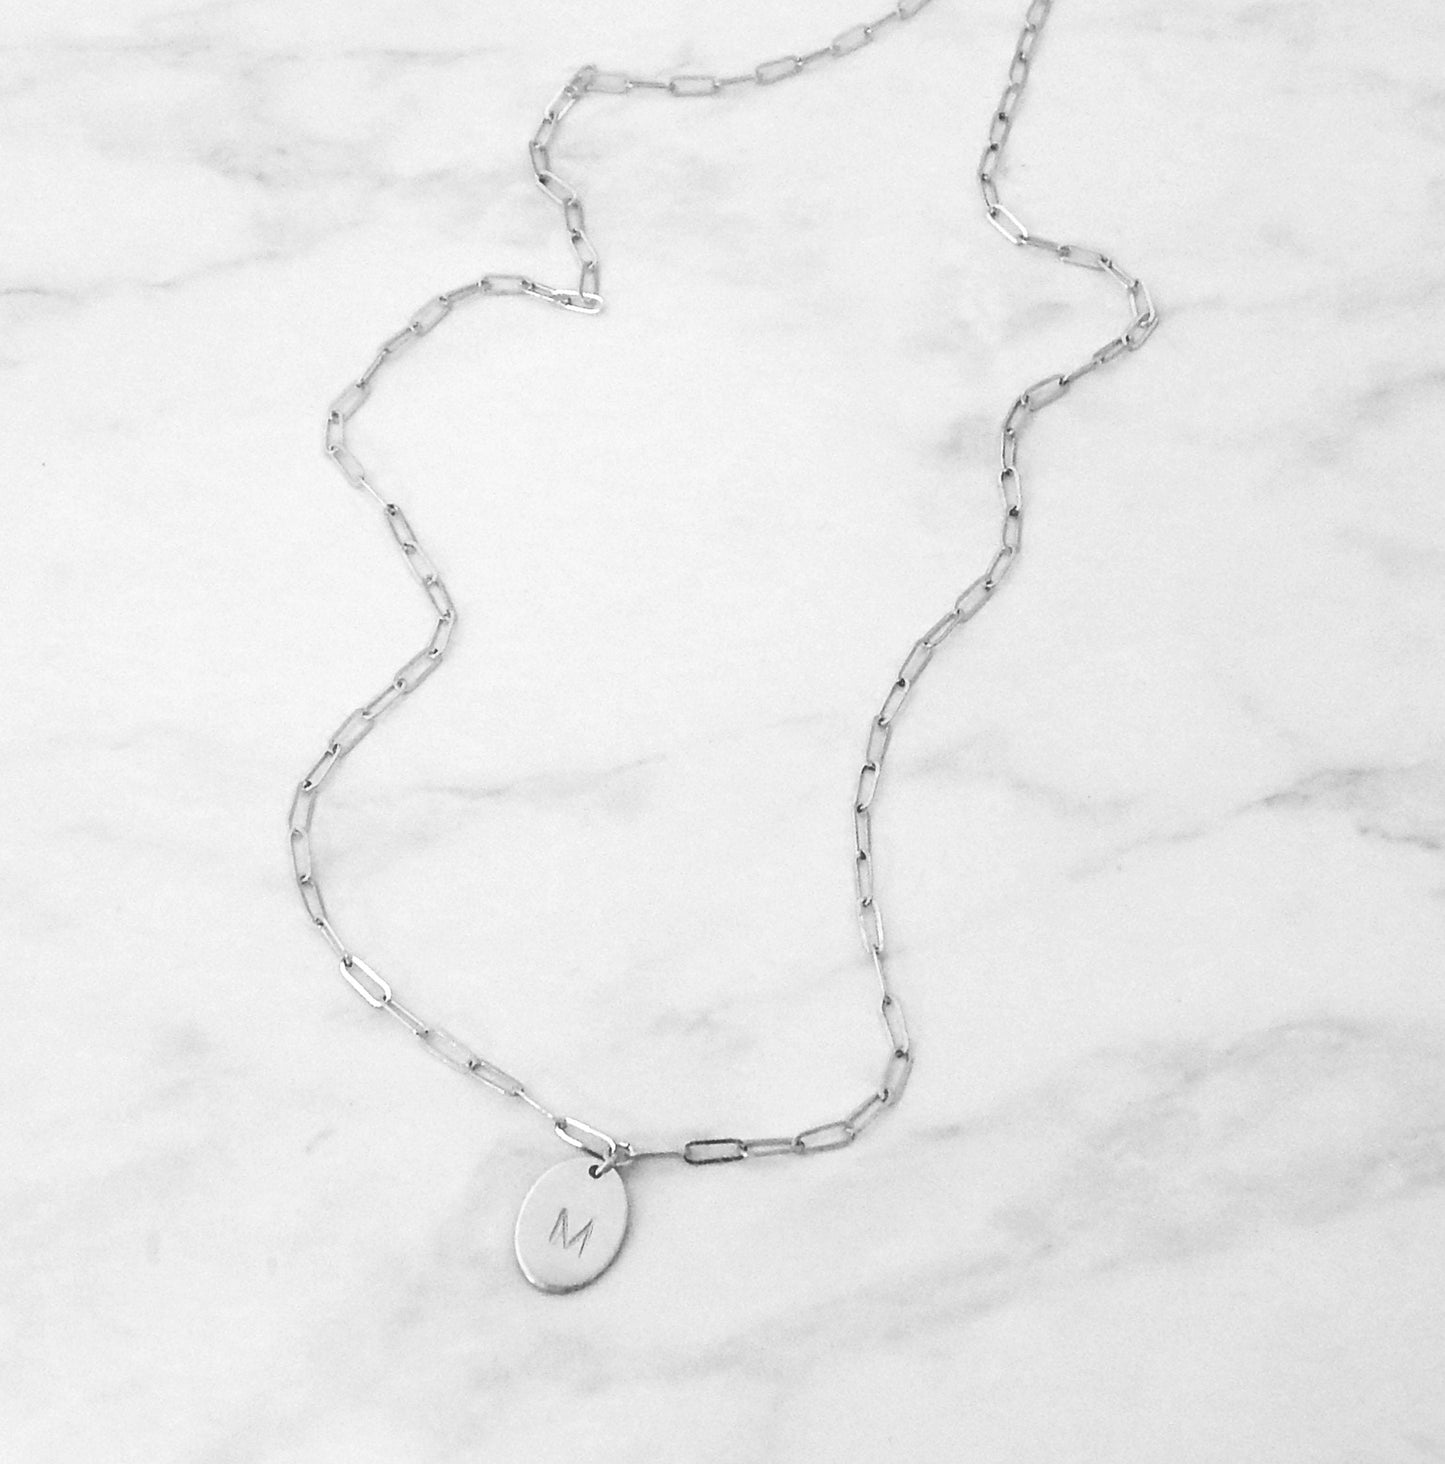 Oval Initial Necklace